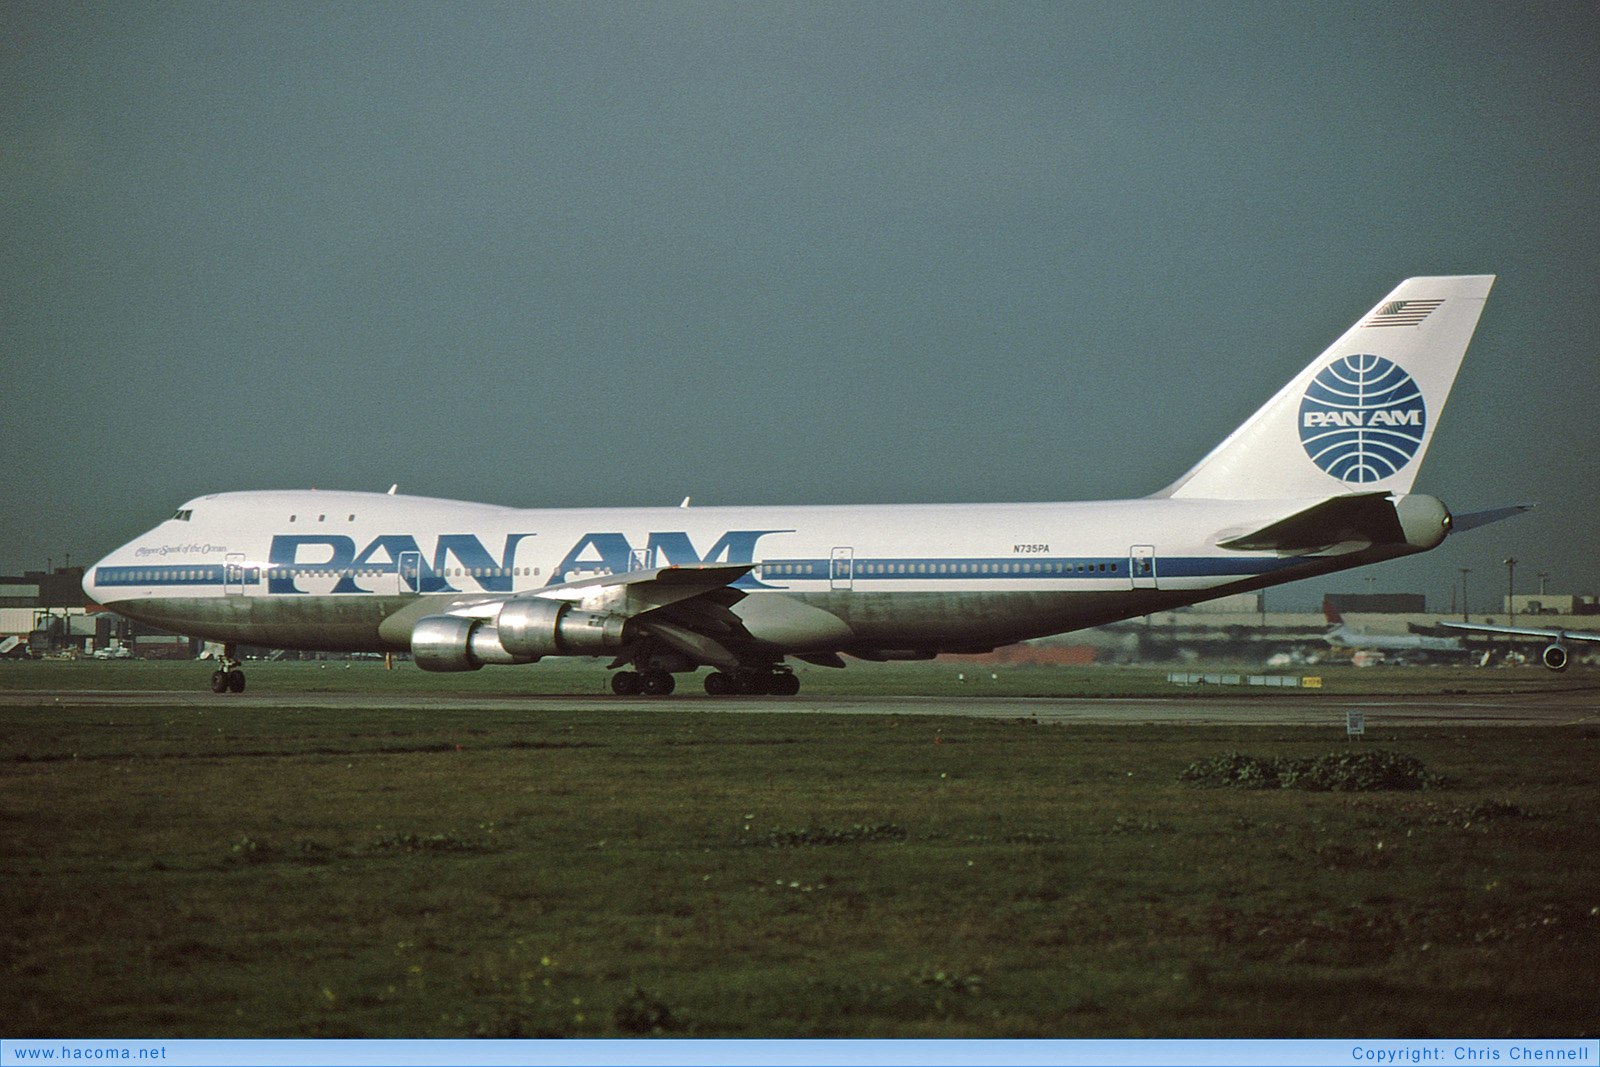 Foto von N735PA - Pan Am Clipper Constitution / Young America / Spark of the Ocean - London Heathrow Airport - 18.11.1984